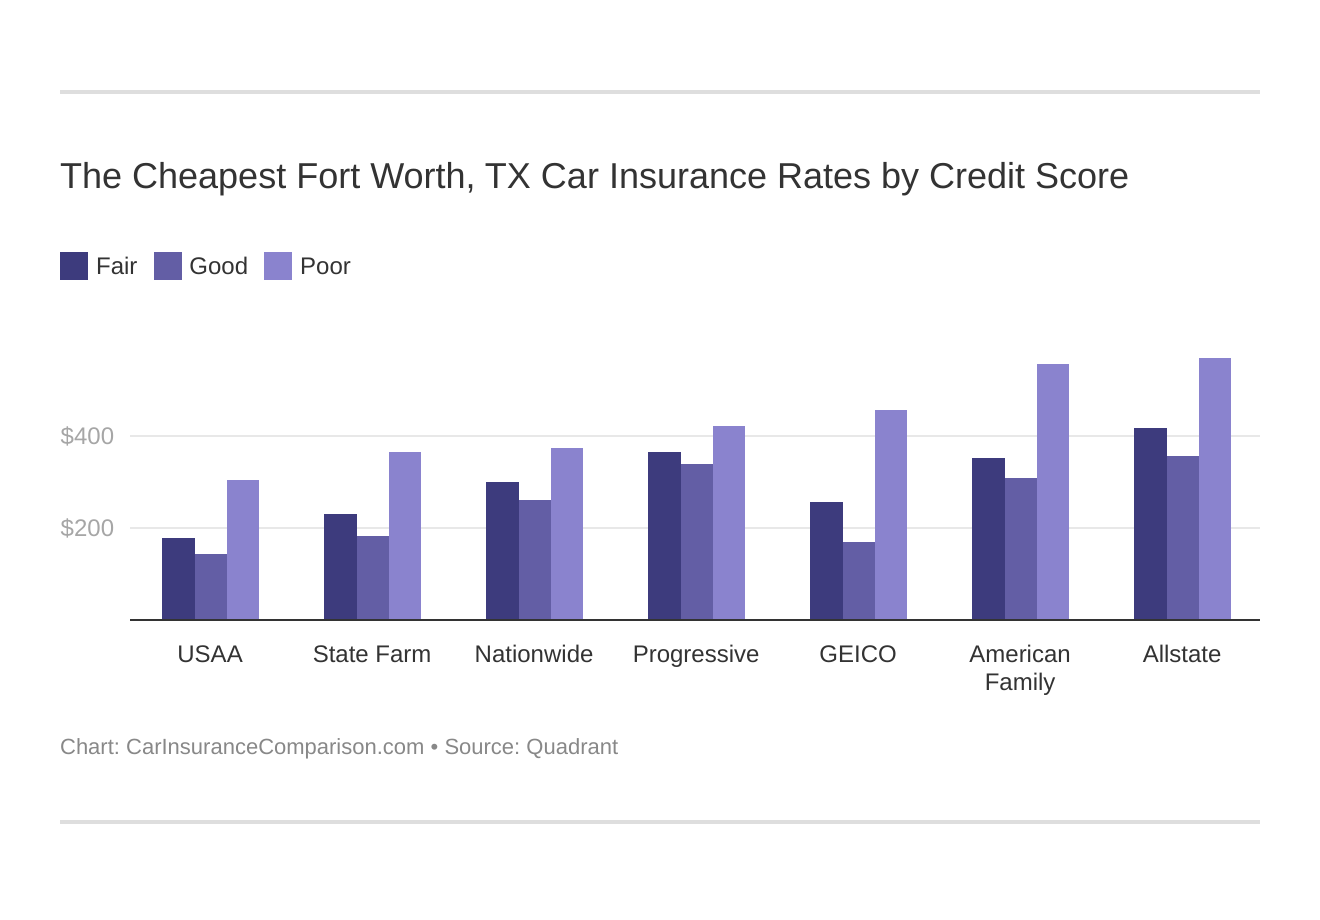 The Cheapest Fort Worth, TX Car Insurance Rates by Credit Score